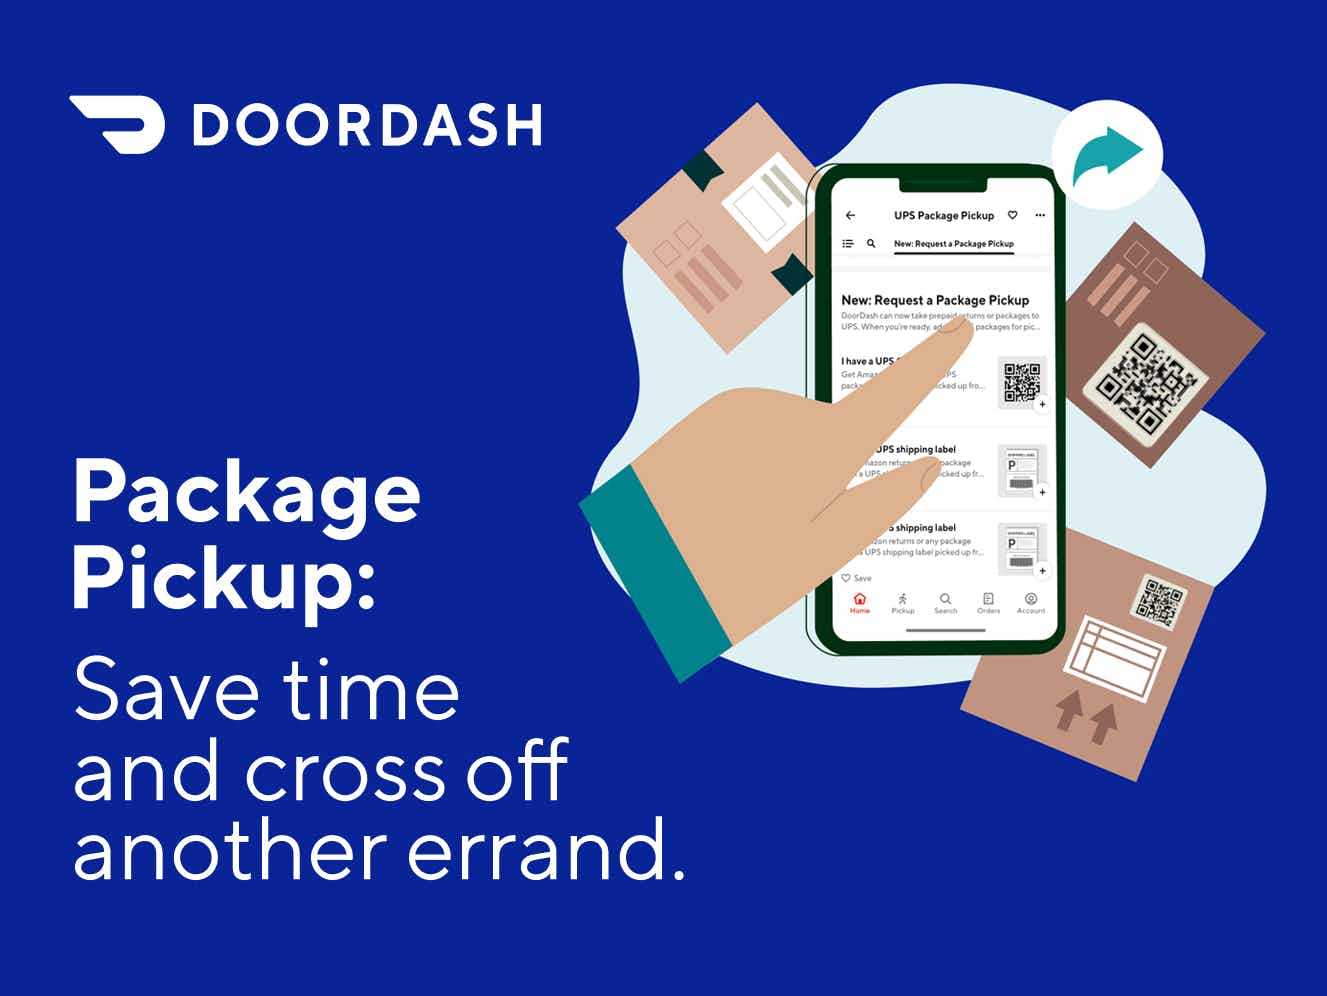 Introductory graphic for DoorDash Package Pickup service.